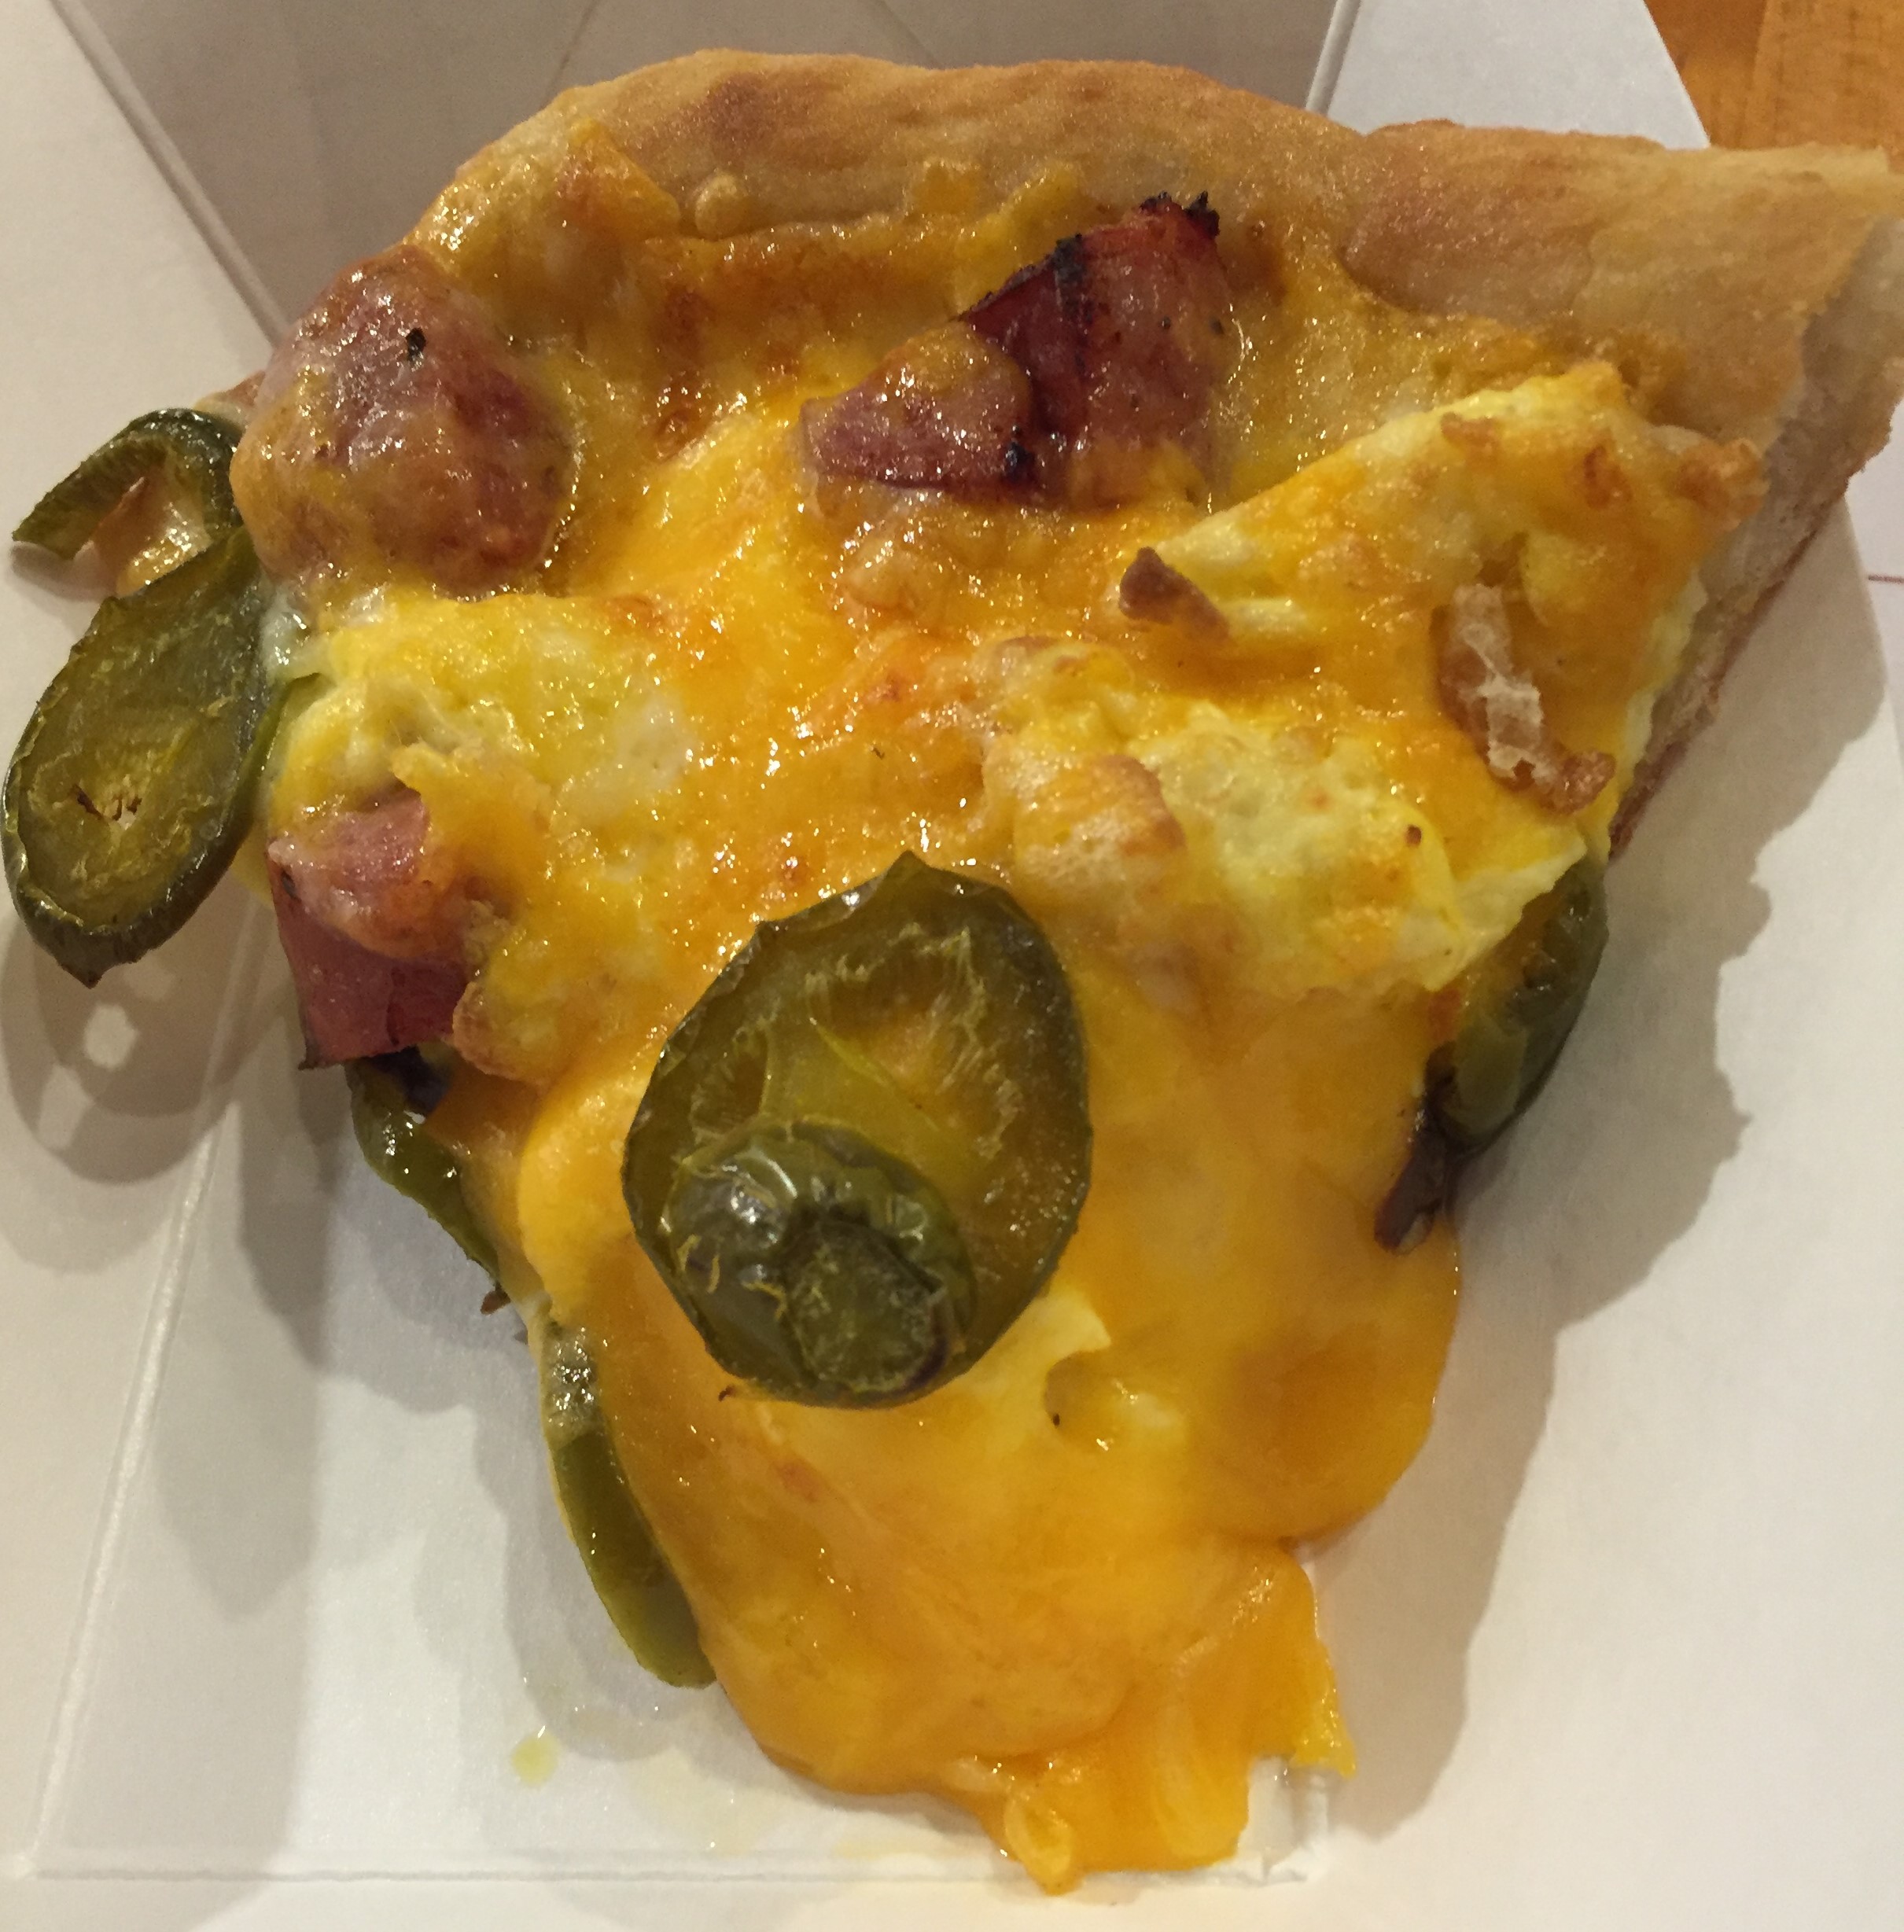 The next was the San Antonian. This one has sausage, eggs, jalapenos, and cheese. They only gave this one to the adults. I liked this one as well but the Green Eggs and Ham was my favorite.